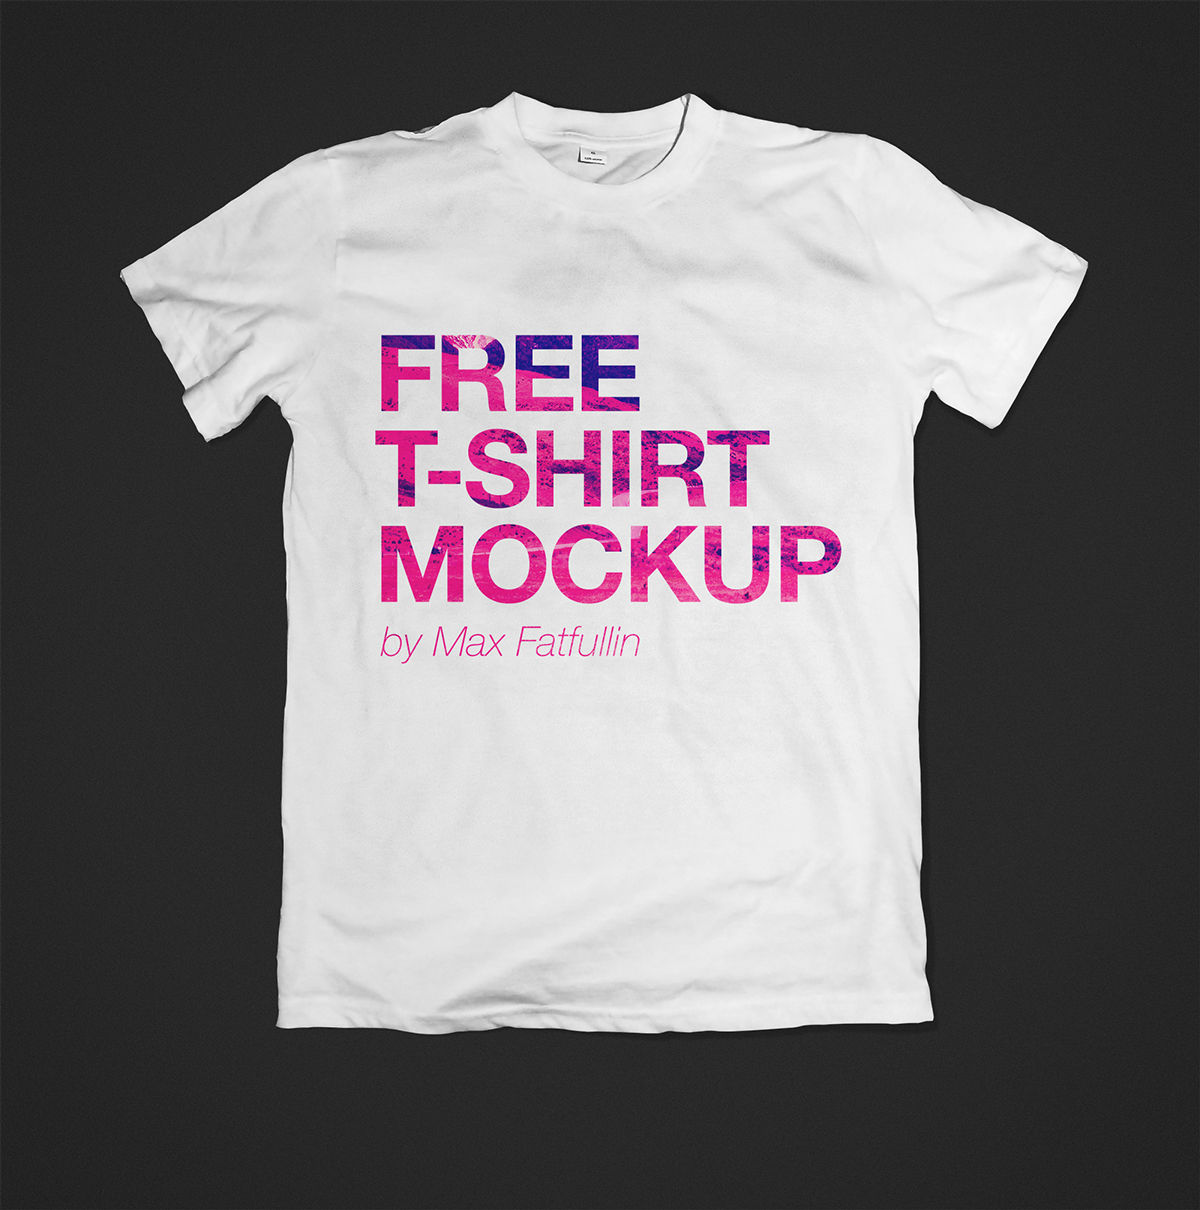 How To Make Shirt Mockup In Photoshop